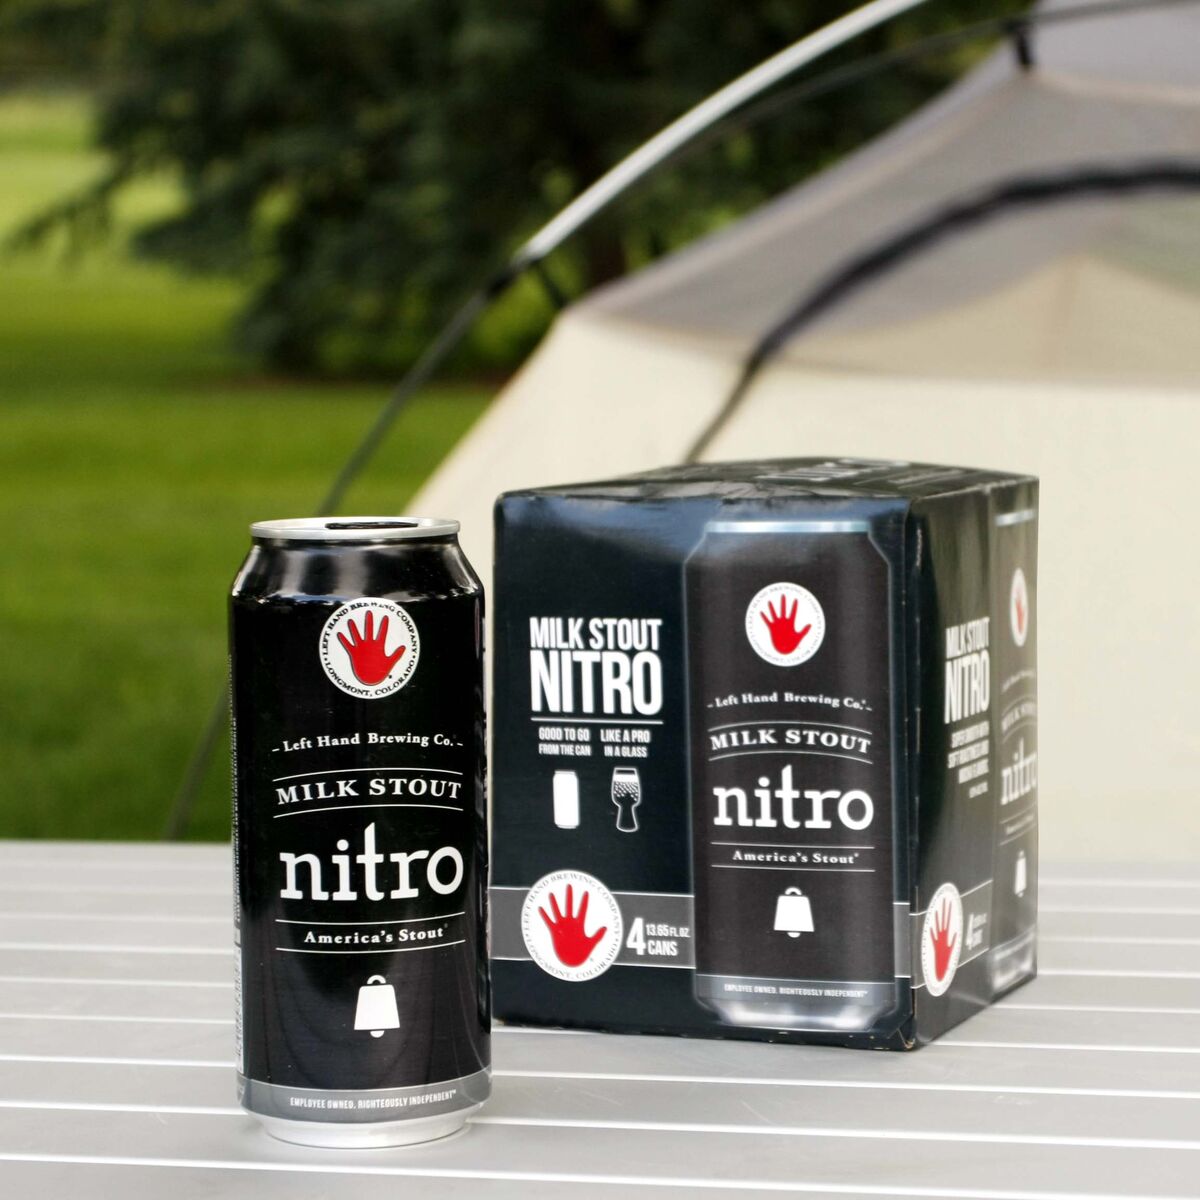 left hand milk stout nitro cans outdoors